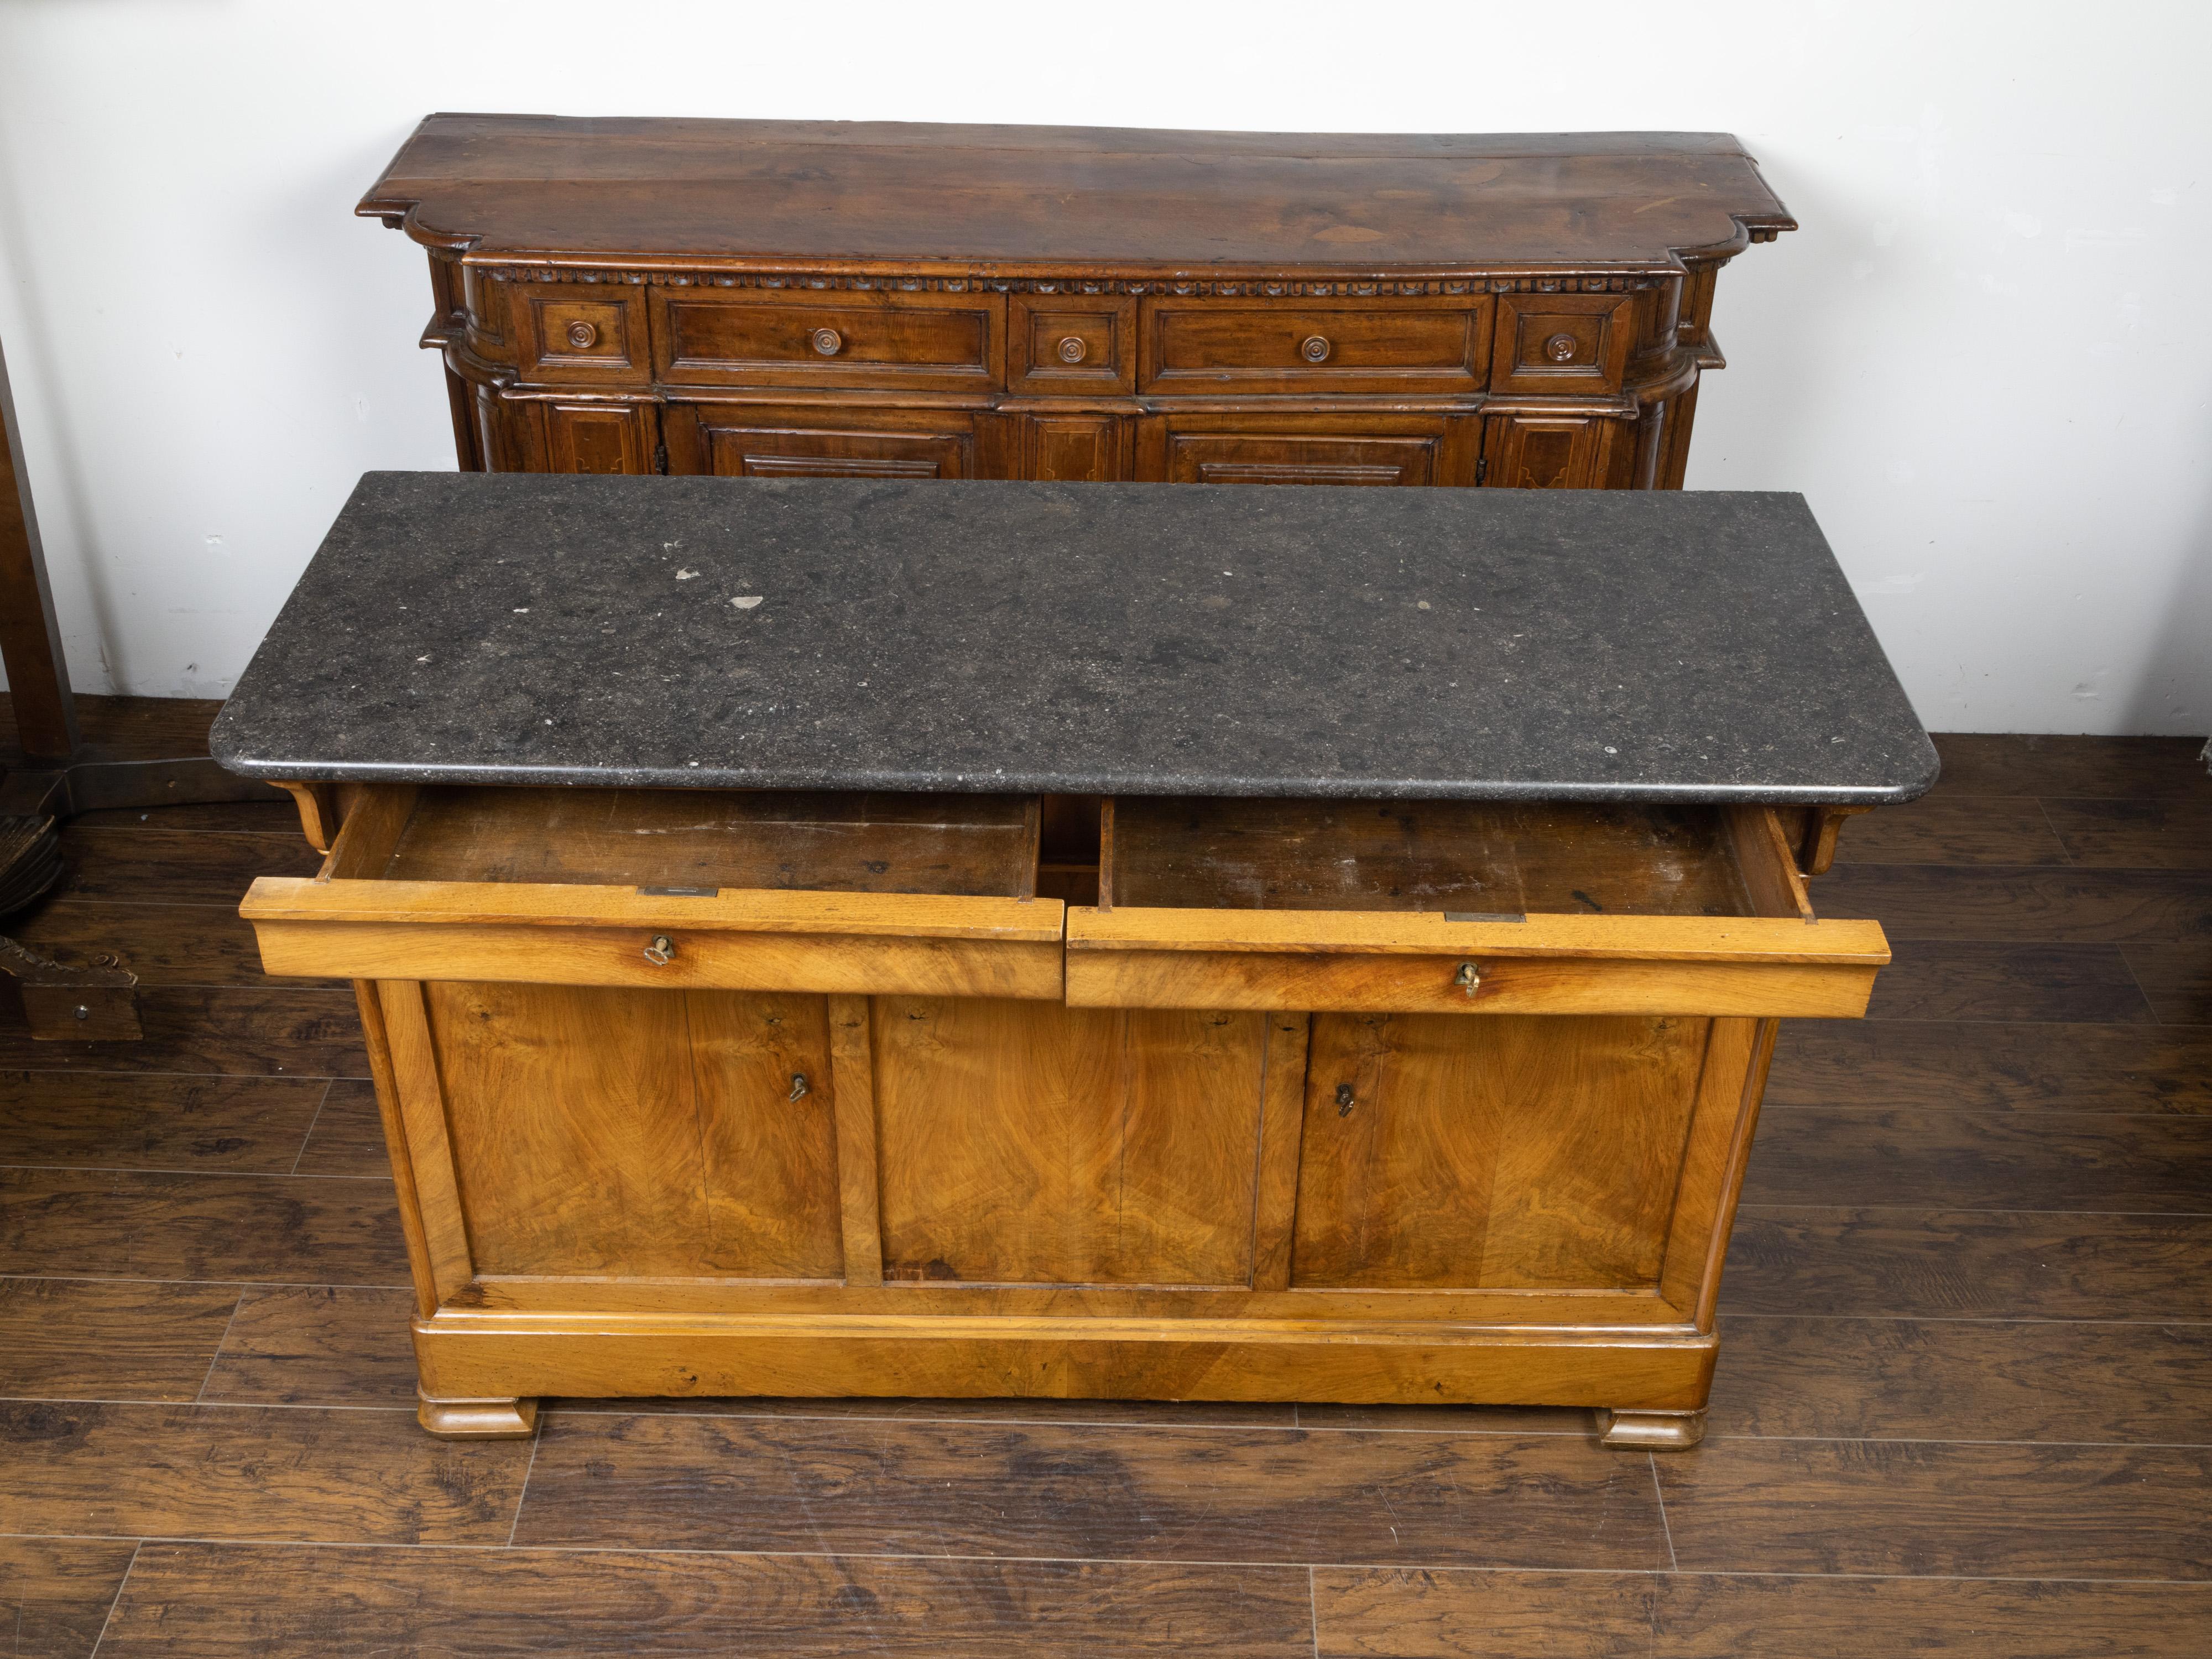 A French Louis-Philippe style walnut enfilade from the late 19th century, with marble top and two drawers over two doors. Created in France during the third quarter of the 19th century, this walnut enfilade features a rectangular dark grey marble